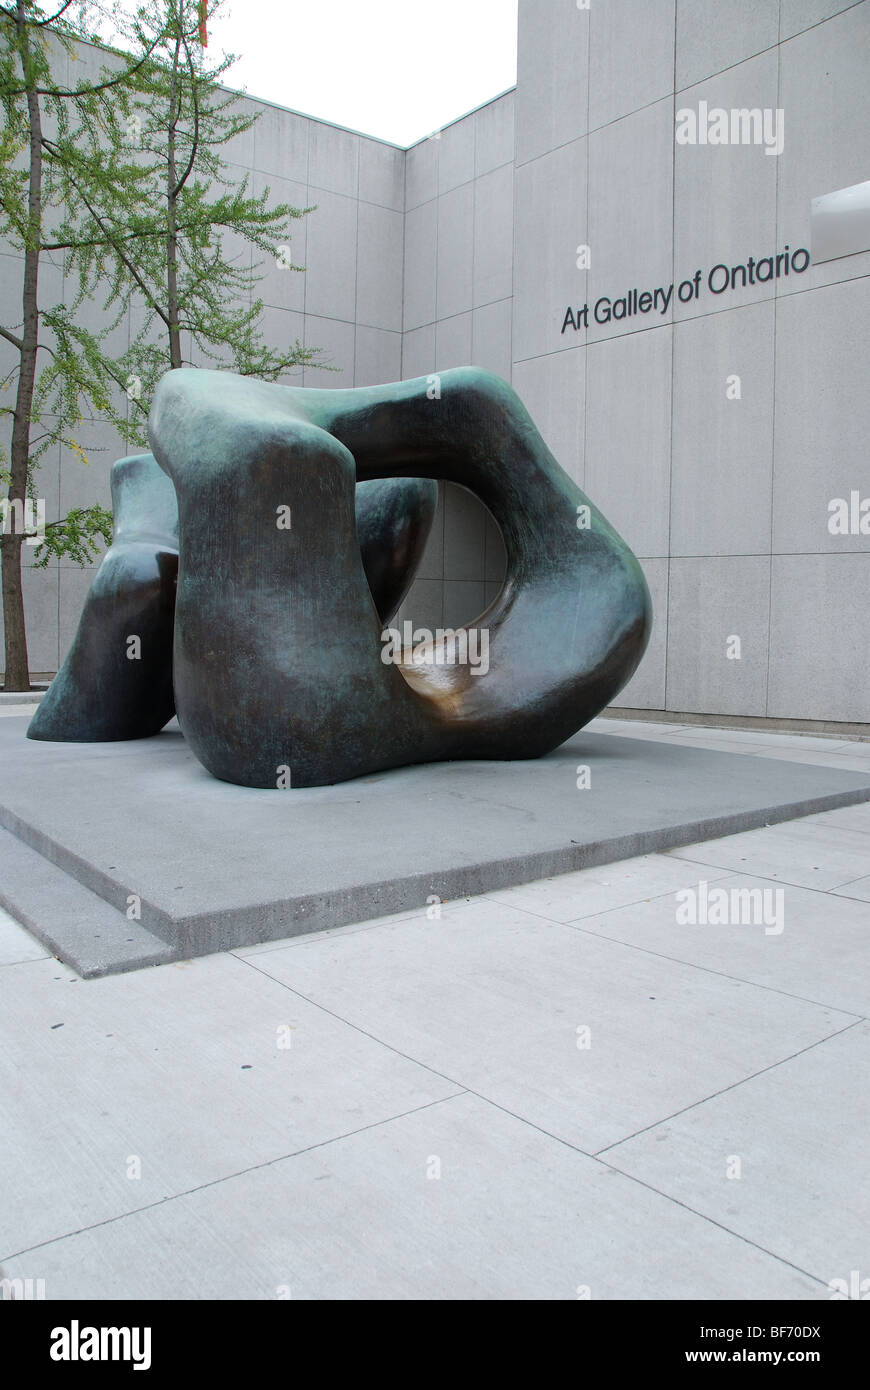 The well-known Henry Moore sculpture on permanent display outside the Art Gallery of Ontario in Toronto Ontario Canada Stock Photo